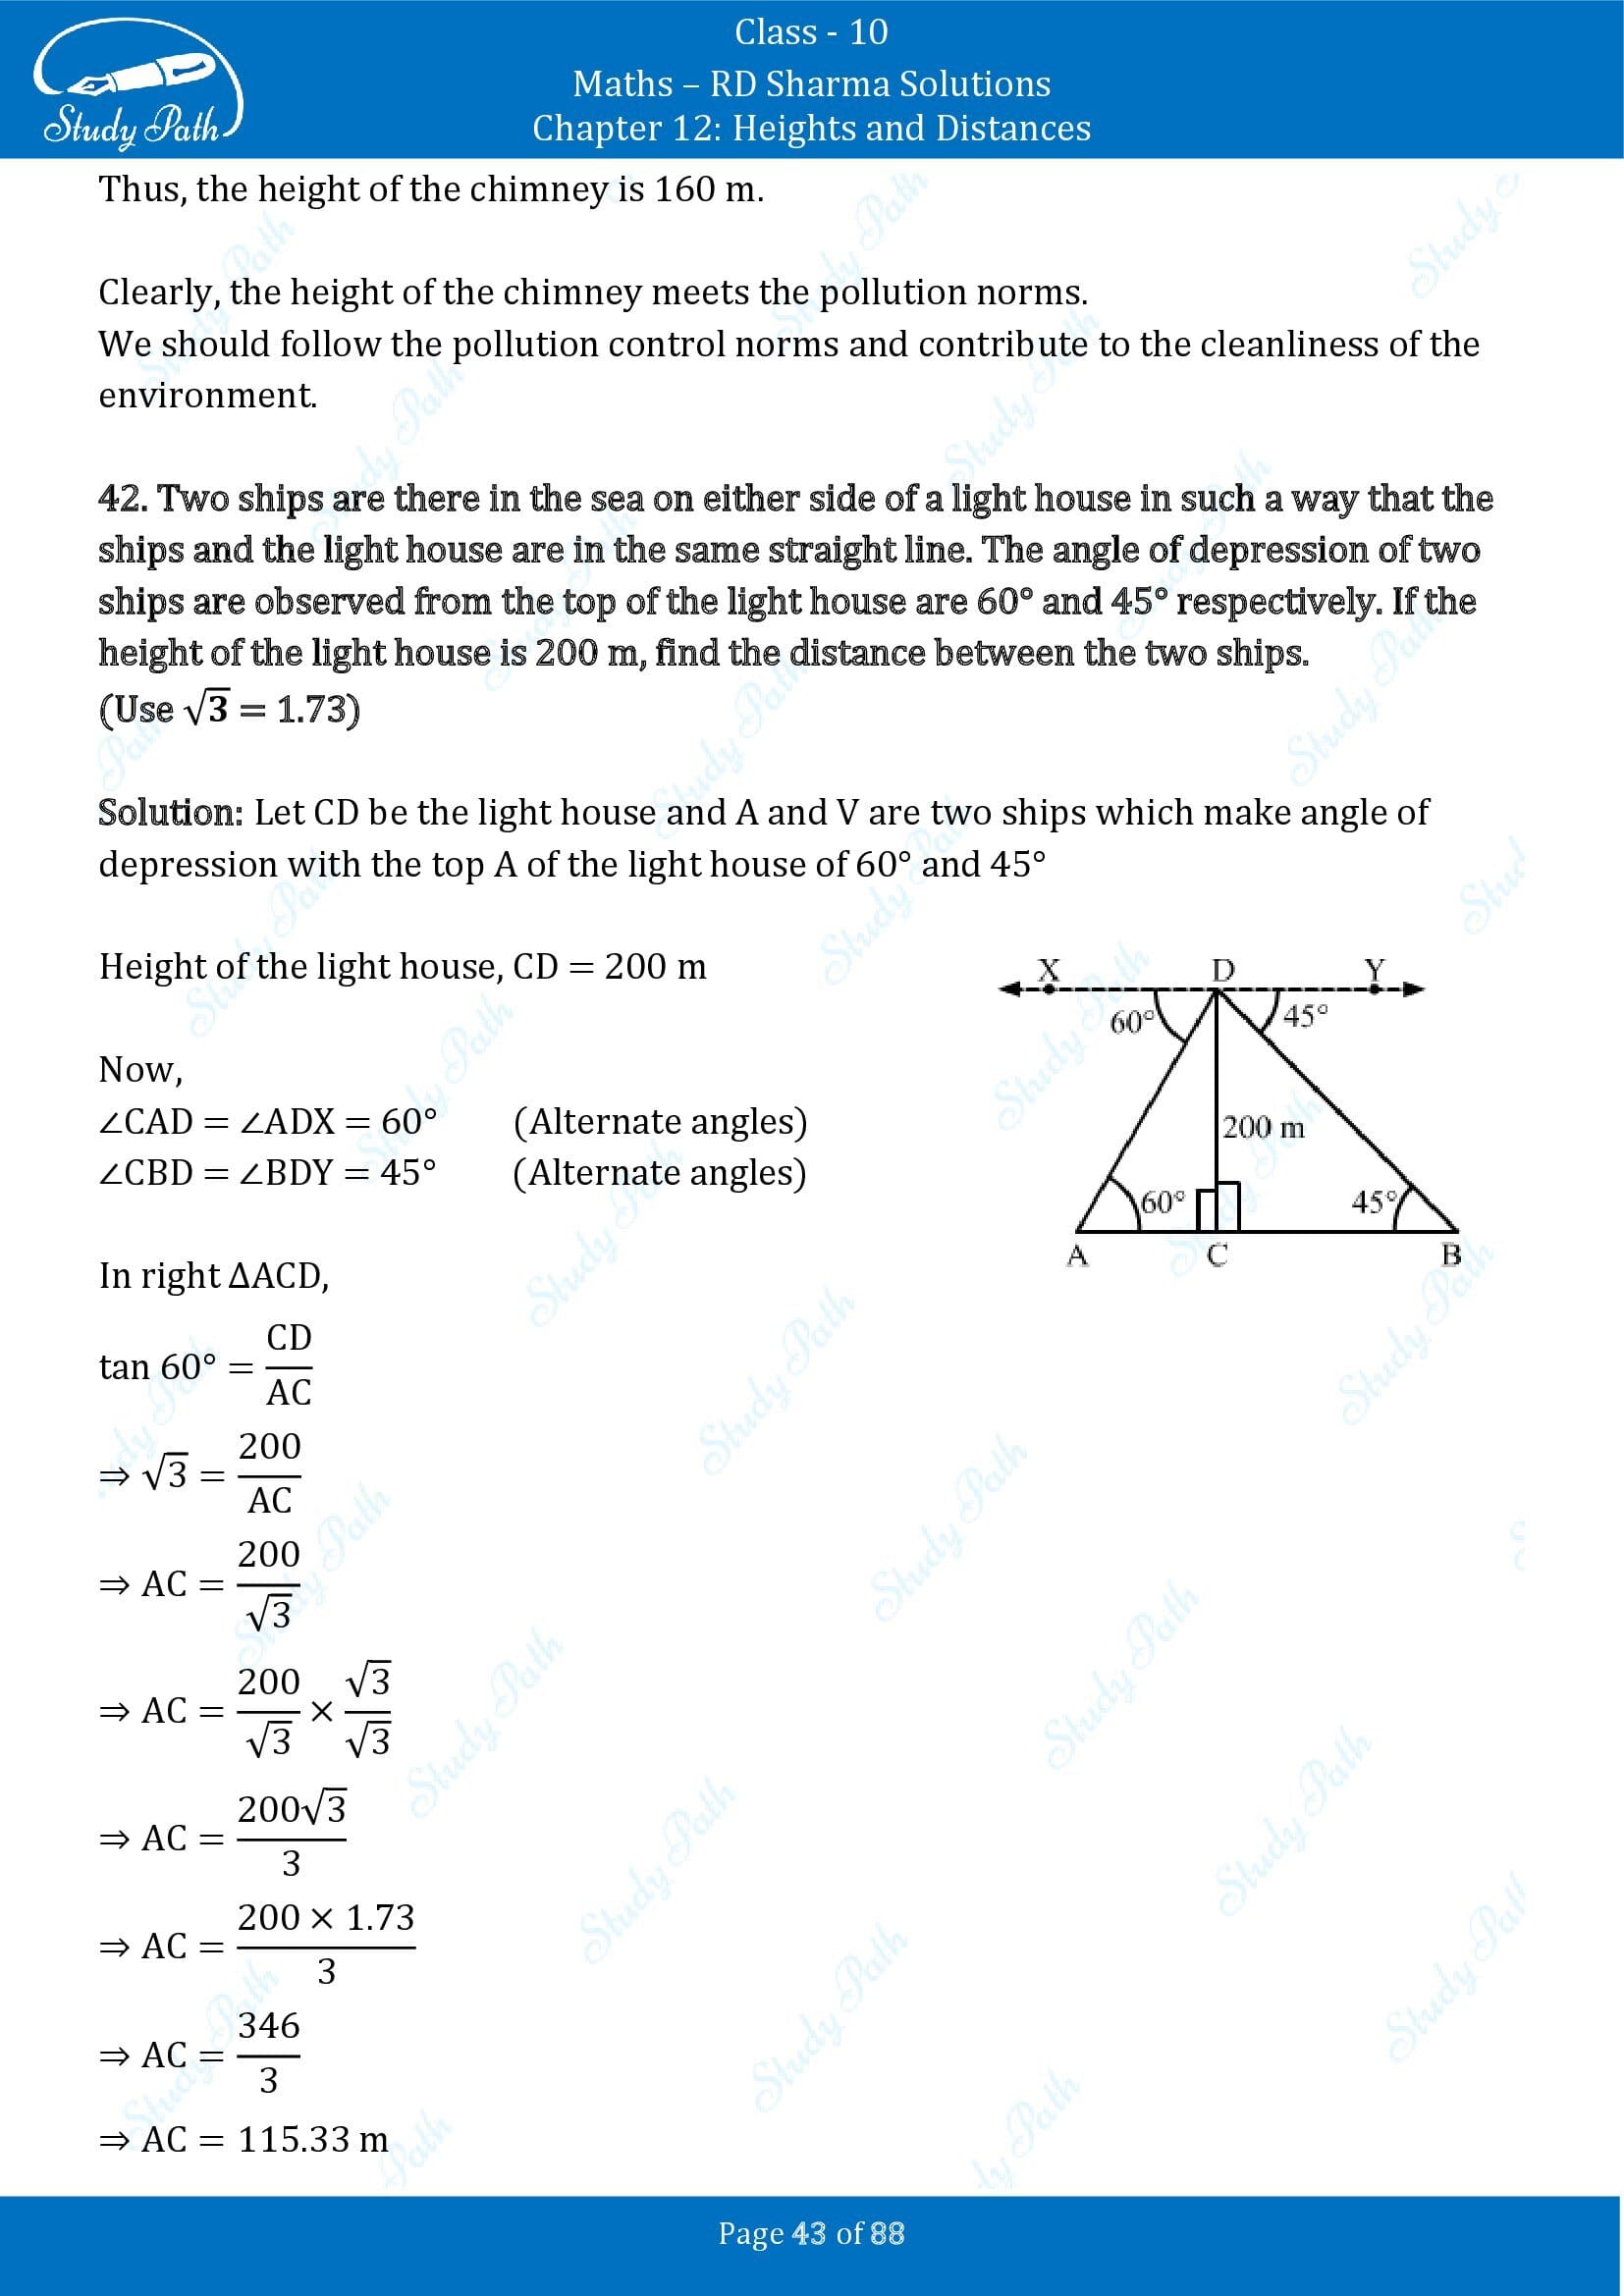 RD Sharma Solutions Class 10 Chapter 12 Heights and Distances Exercise 12.1 00043